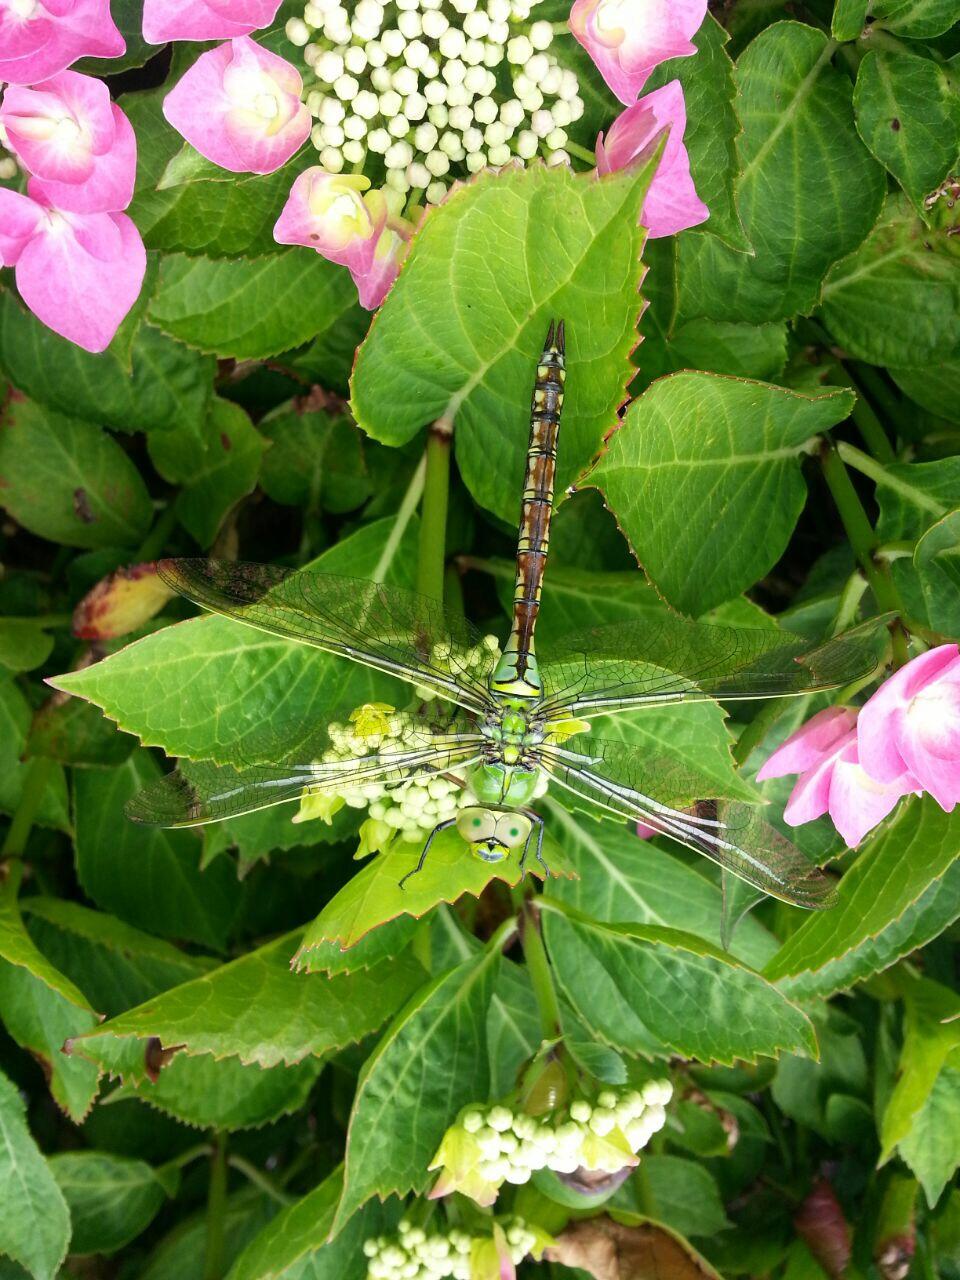 Reader Chaniece Truelove sent in this beautiful picture of a dragonfly in her dad's garden.